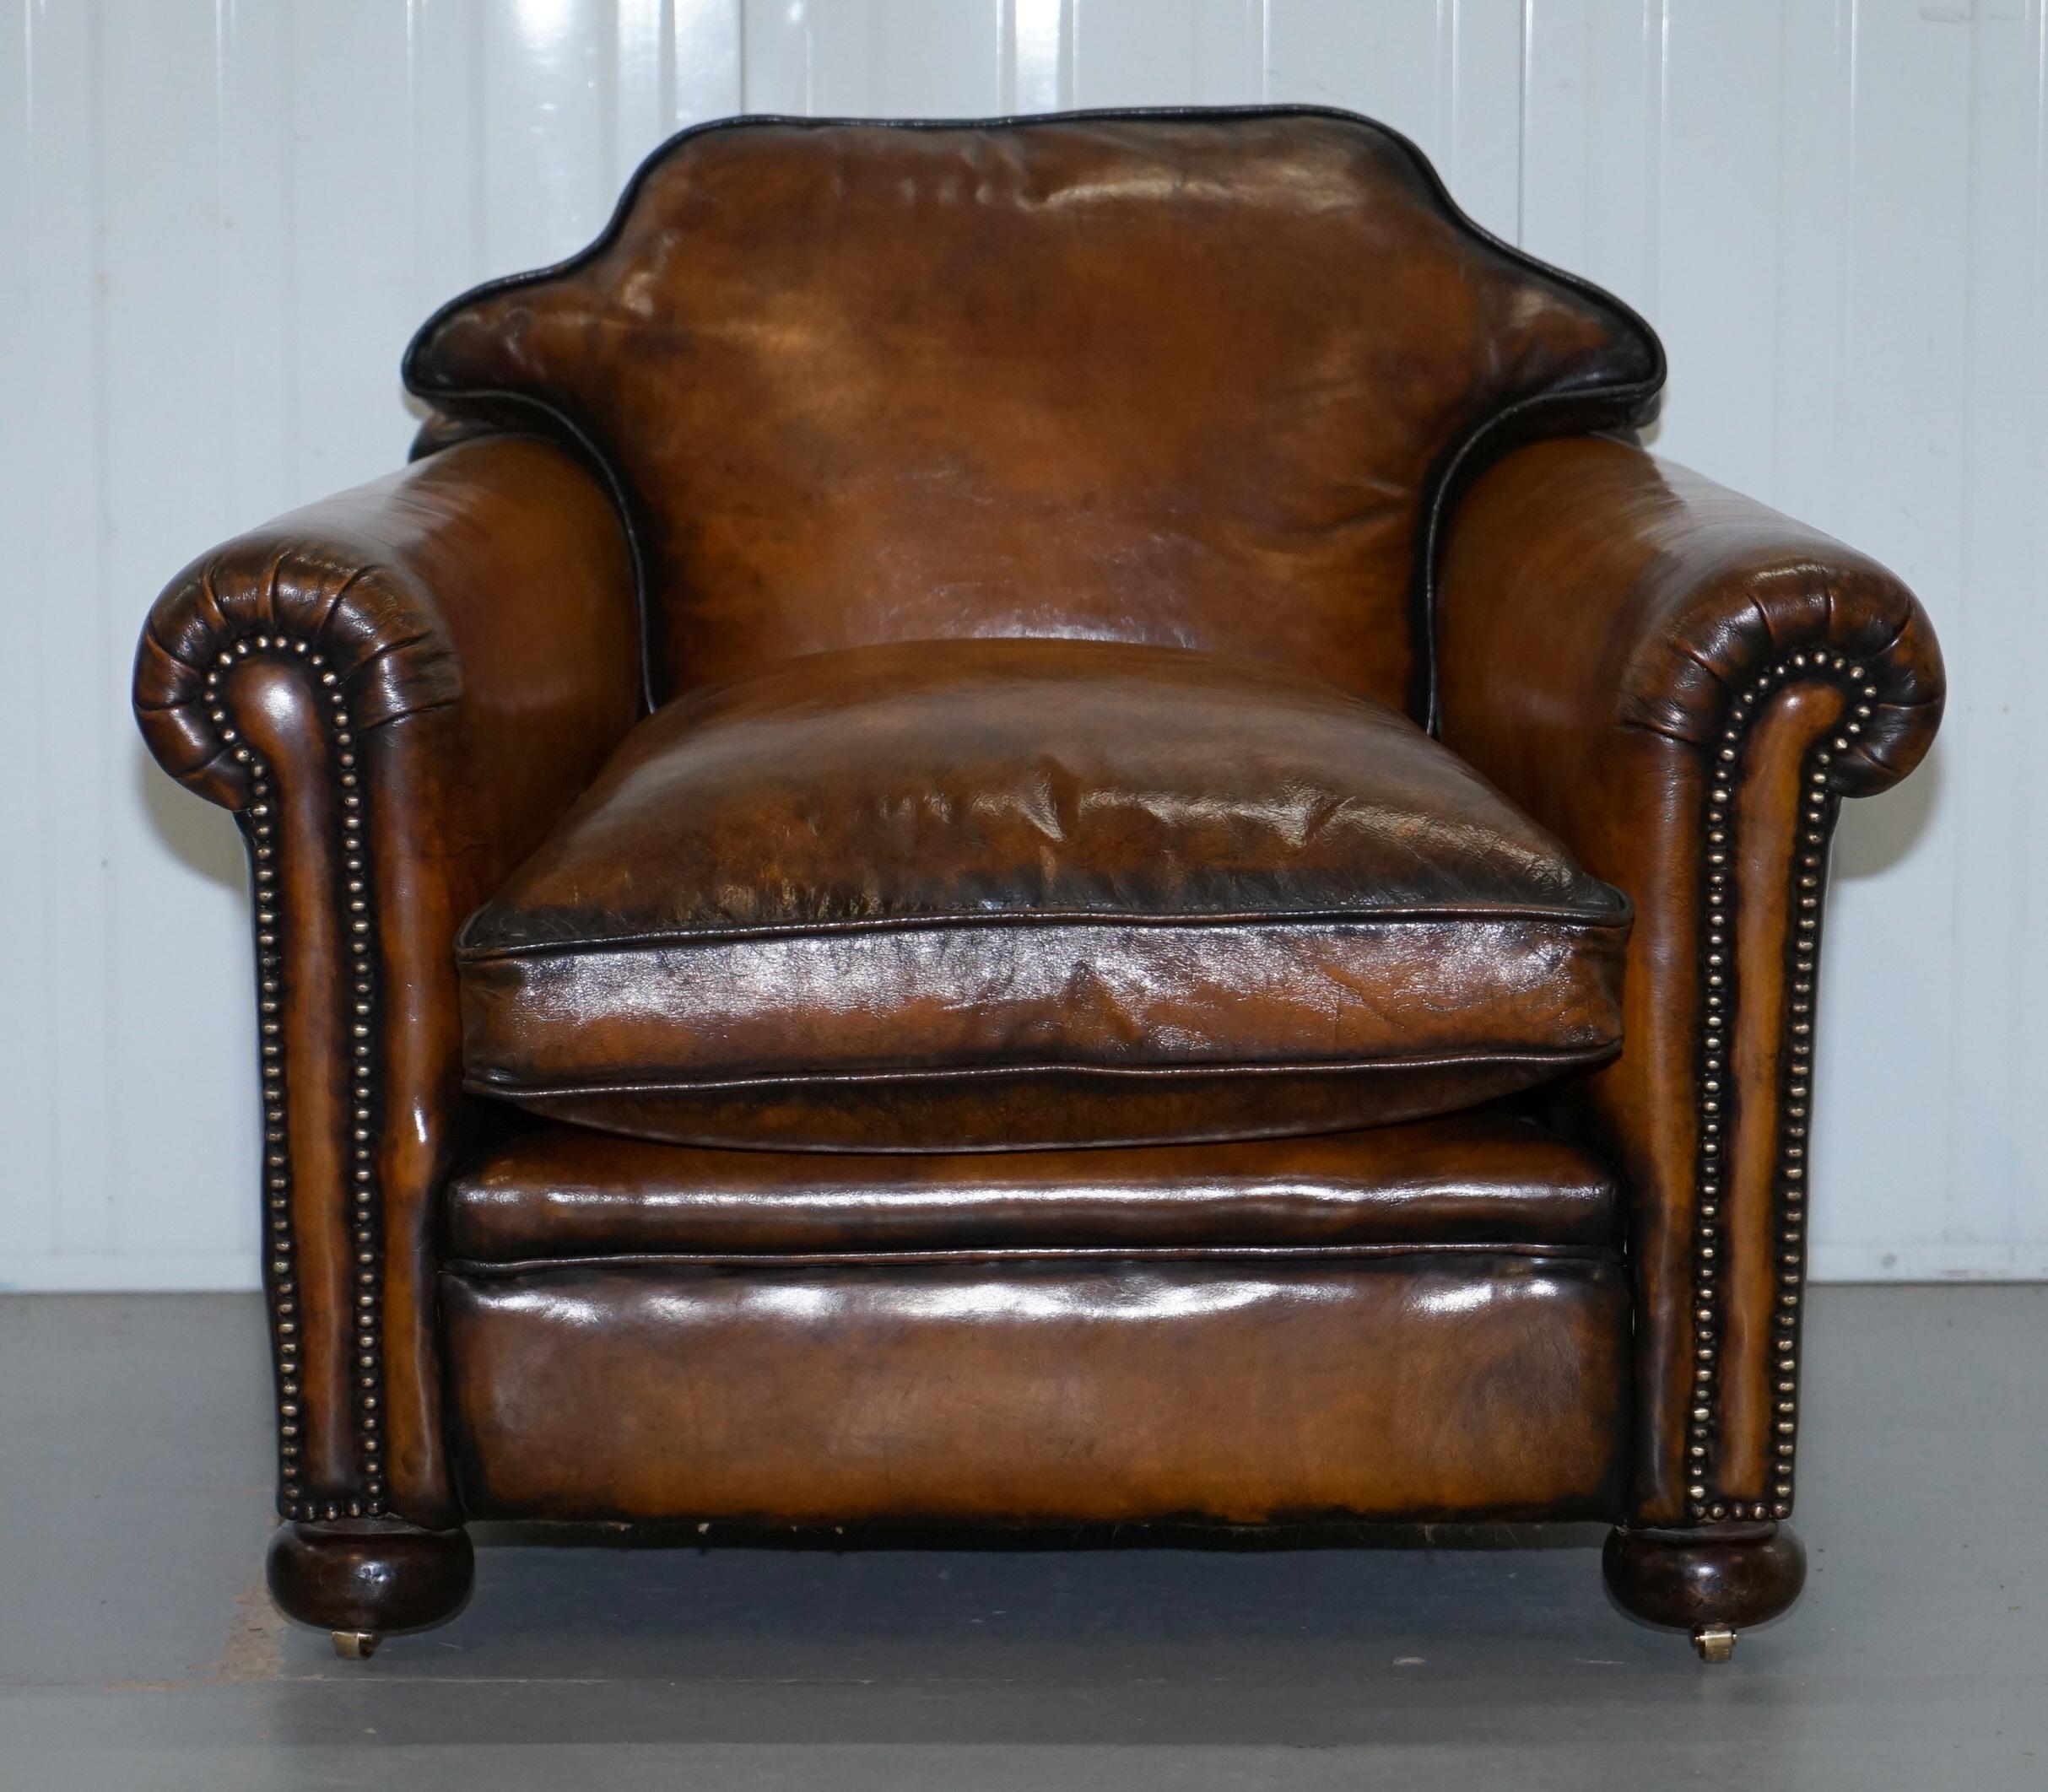 Pair of Restored Victorian Brown Leather Club Armchairs Feather Filled Cushions (Viktorianisch)